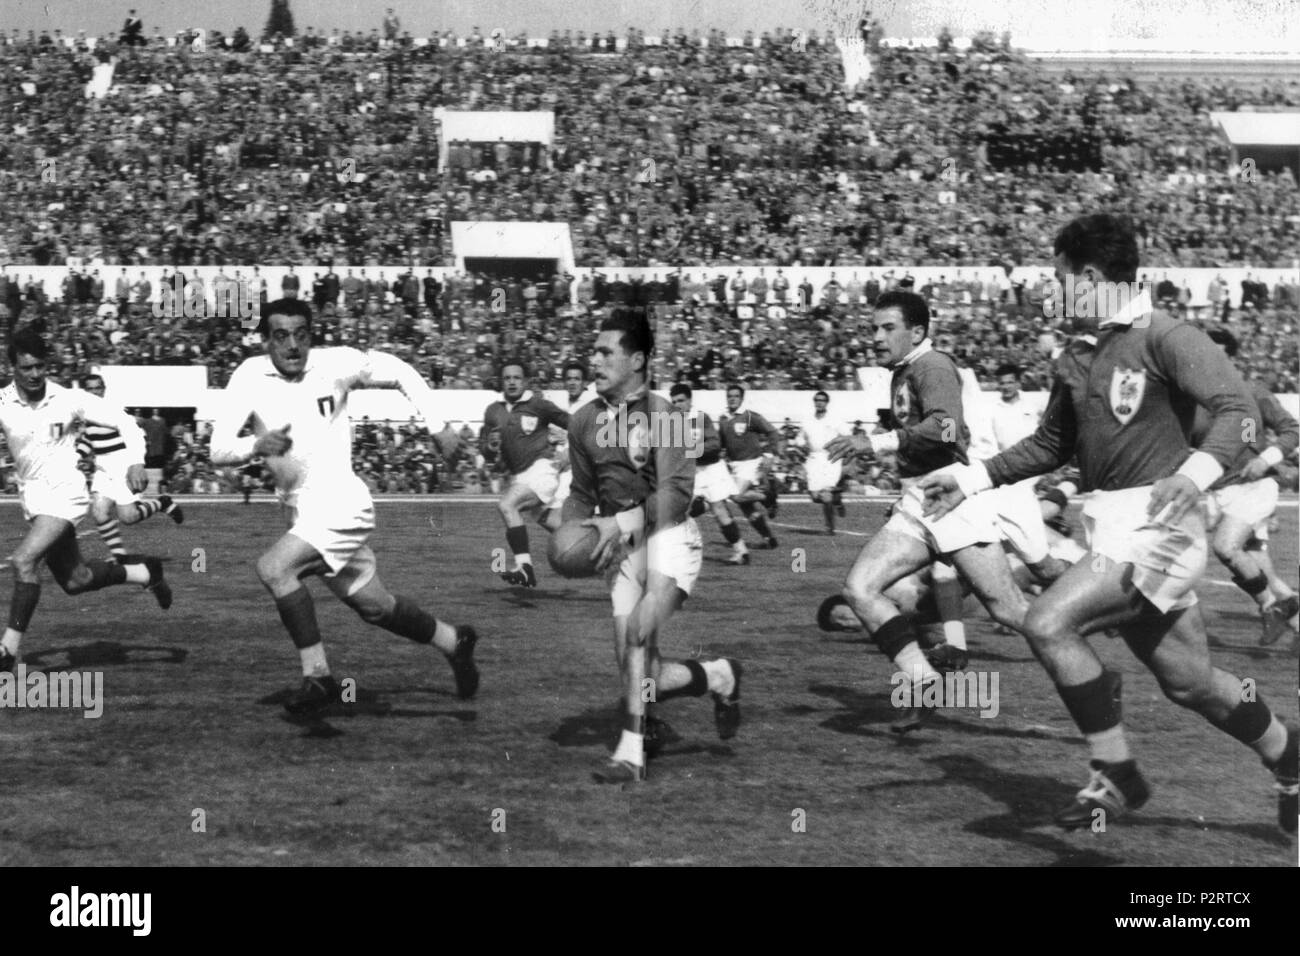 1954 Rugby union European Cup final between Italy and France at the Stadium of the 100 000 (now Stadio Olimpico) in Rome